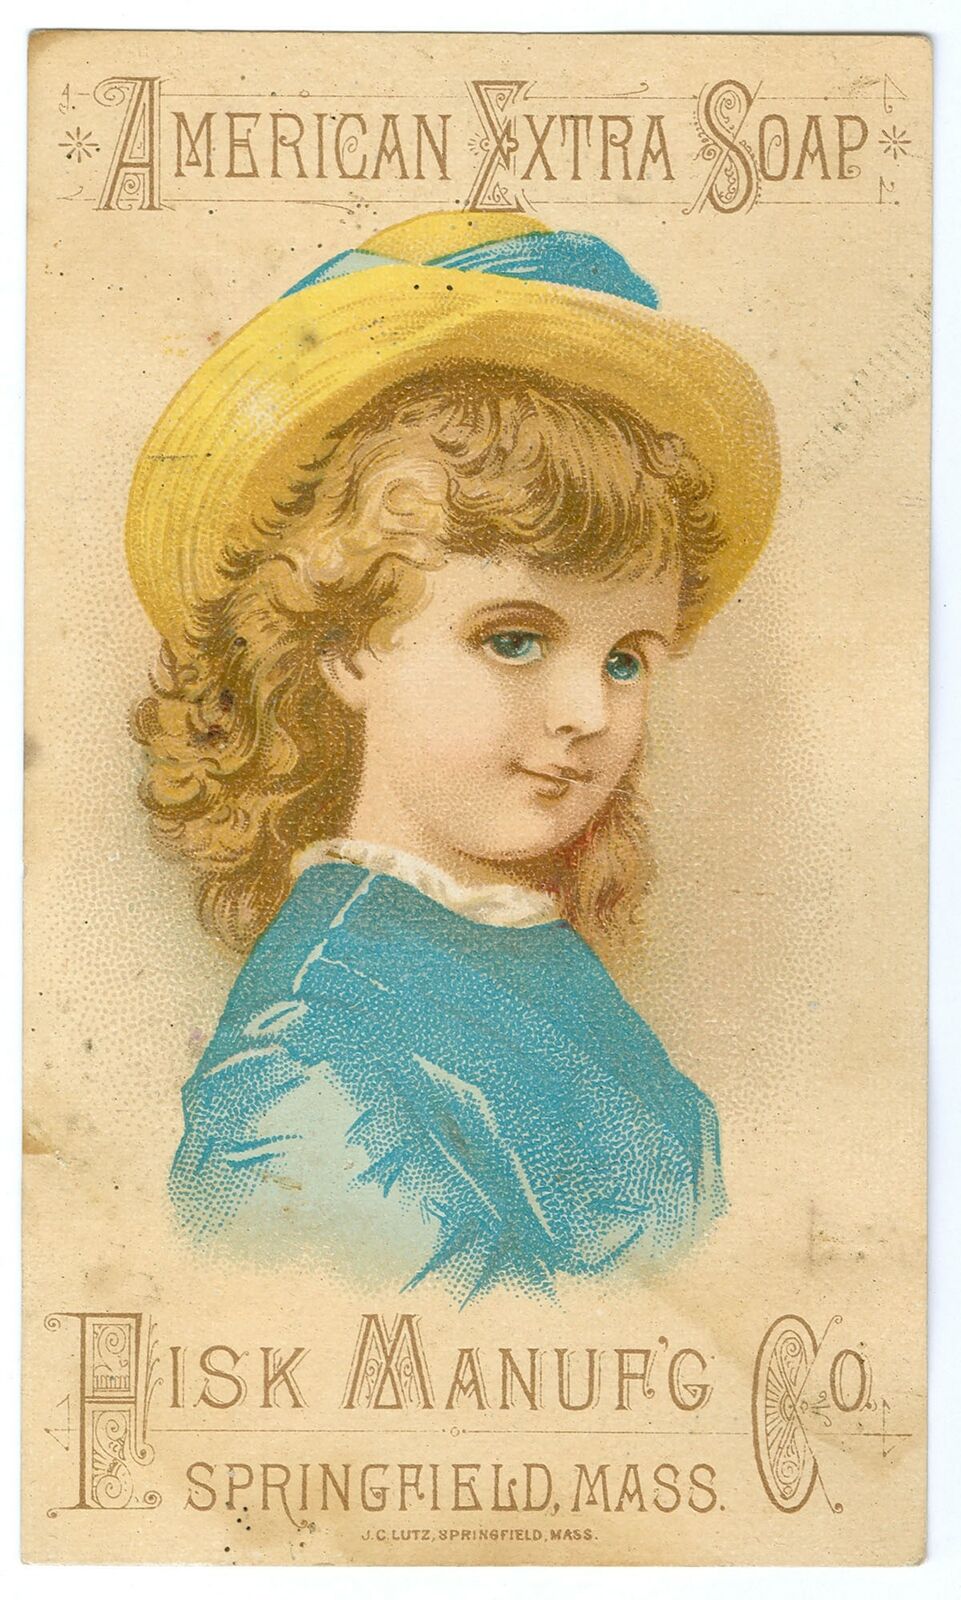 Fisk Manufacturing American Extra Soap Victorian Trade Card